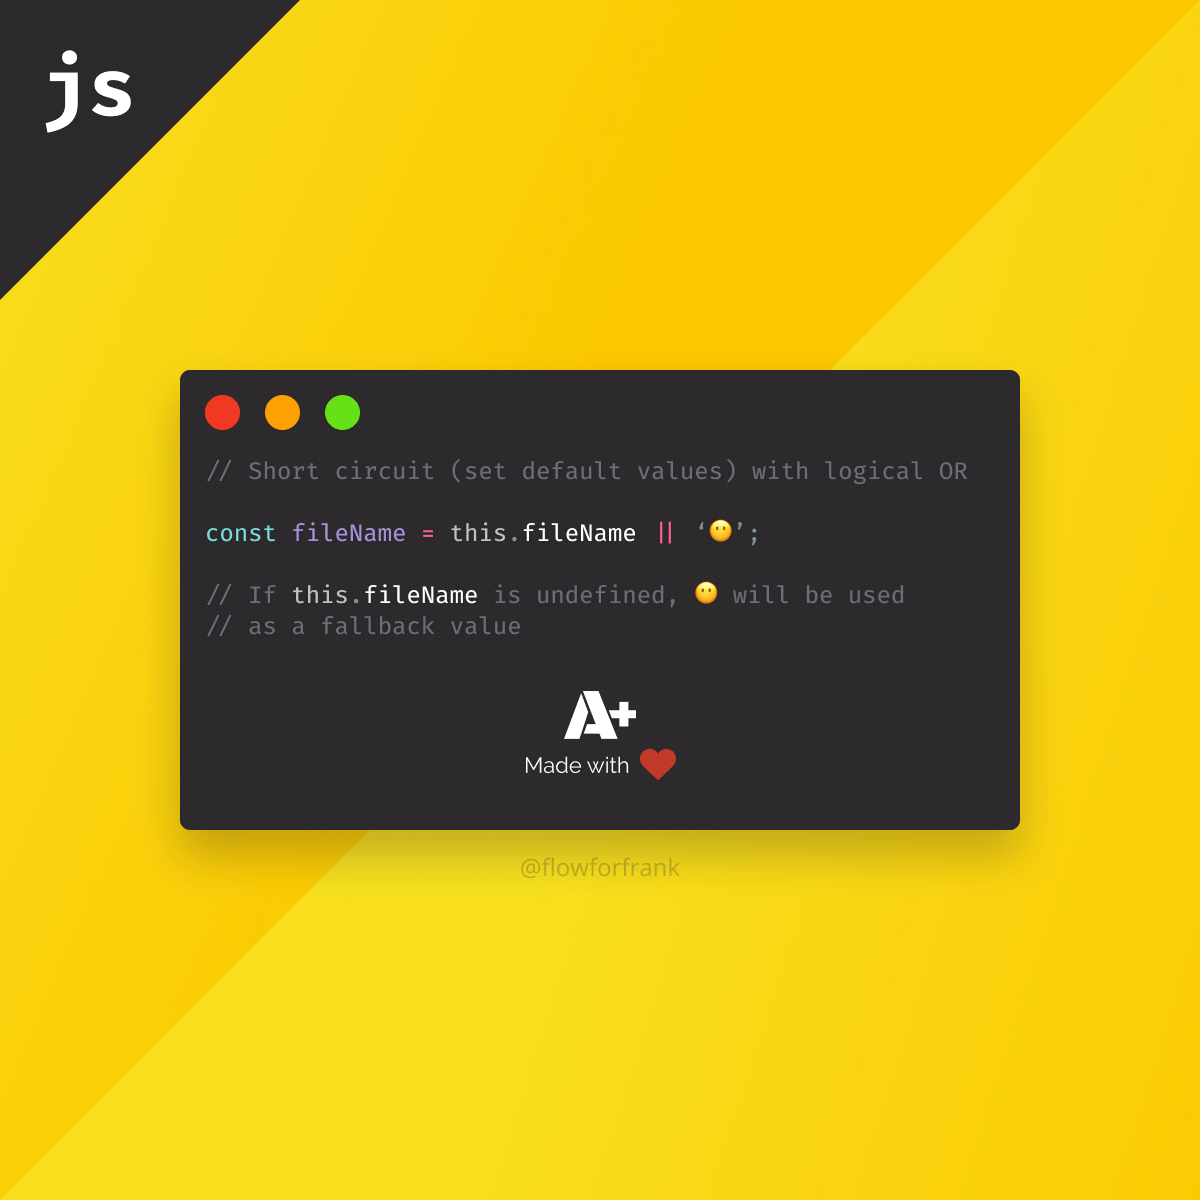 What is Short Circuit Evaluation in JavaScript?